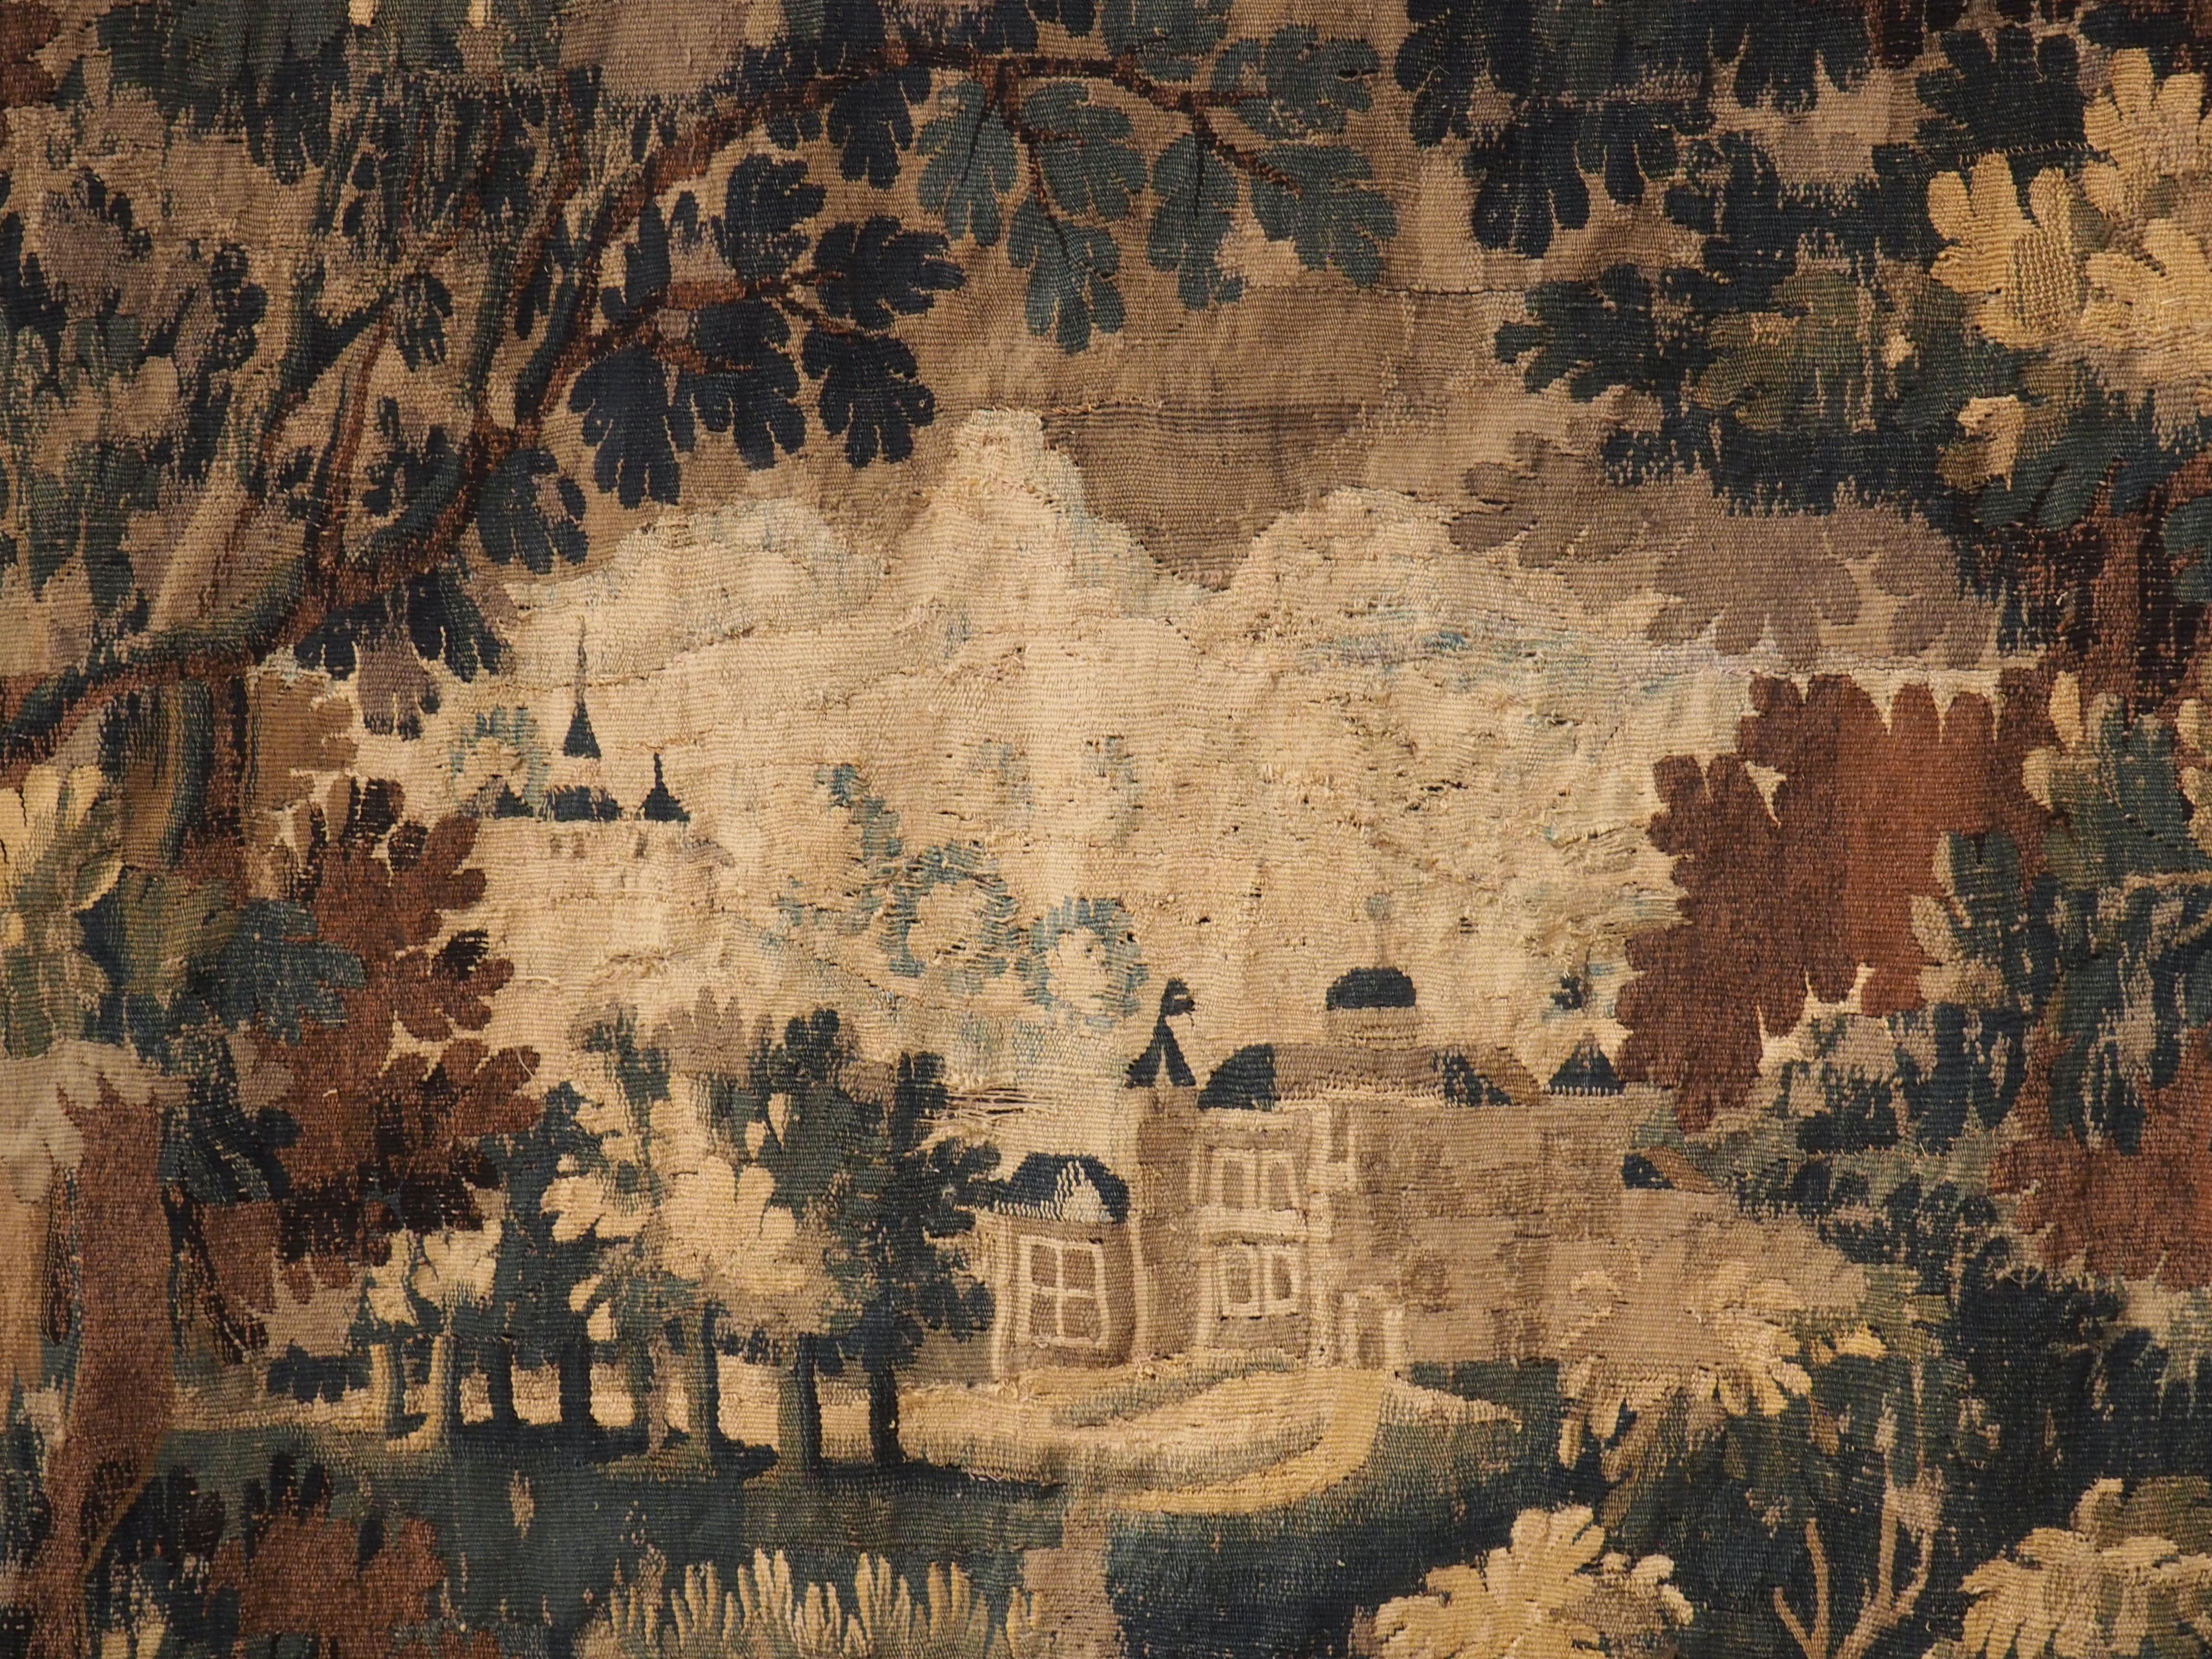 Hand-Woven 17th Century Aubusson Verdure Tapestry with Heavily Wooded Château Scene